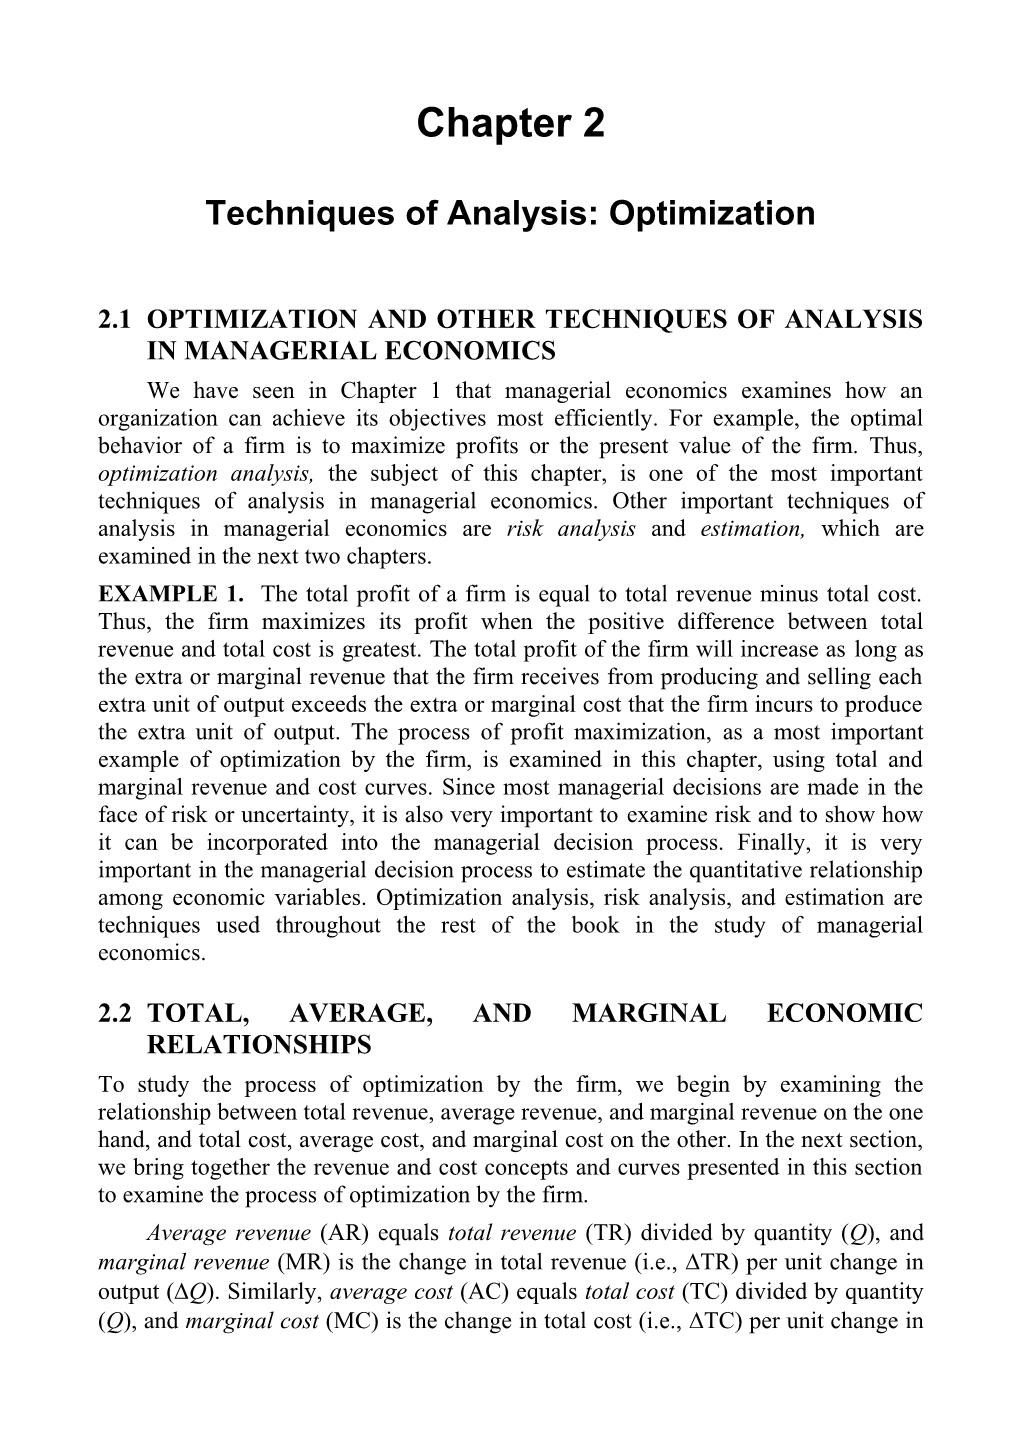 2.1Optimization and Other Techniques of Analysis in Managerial Economics